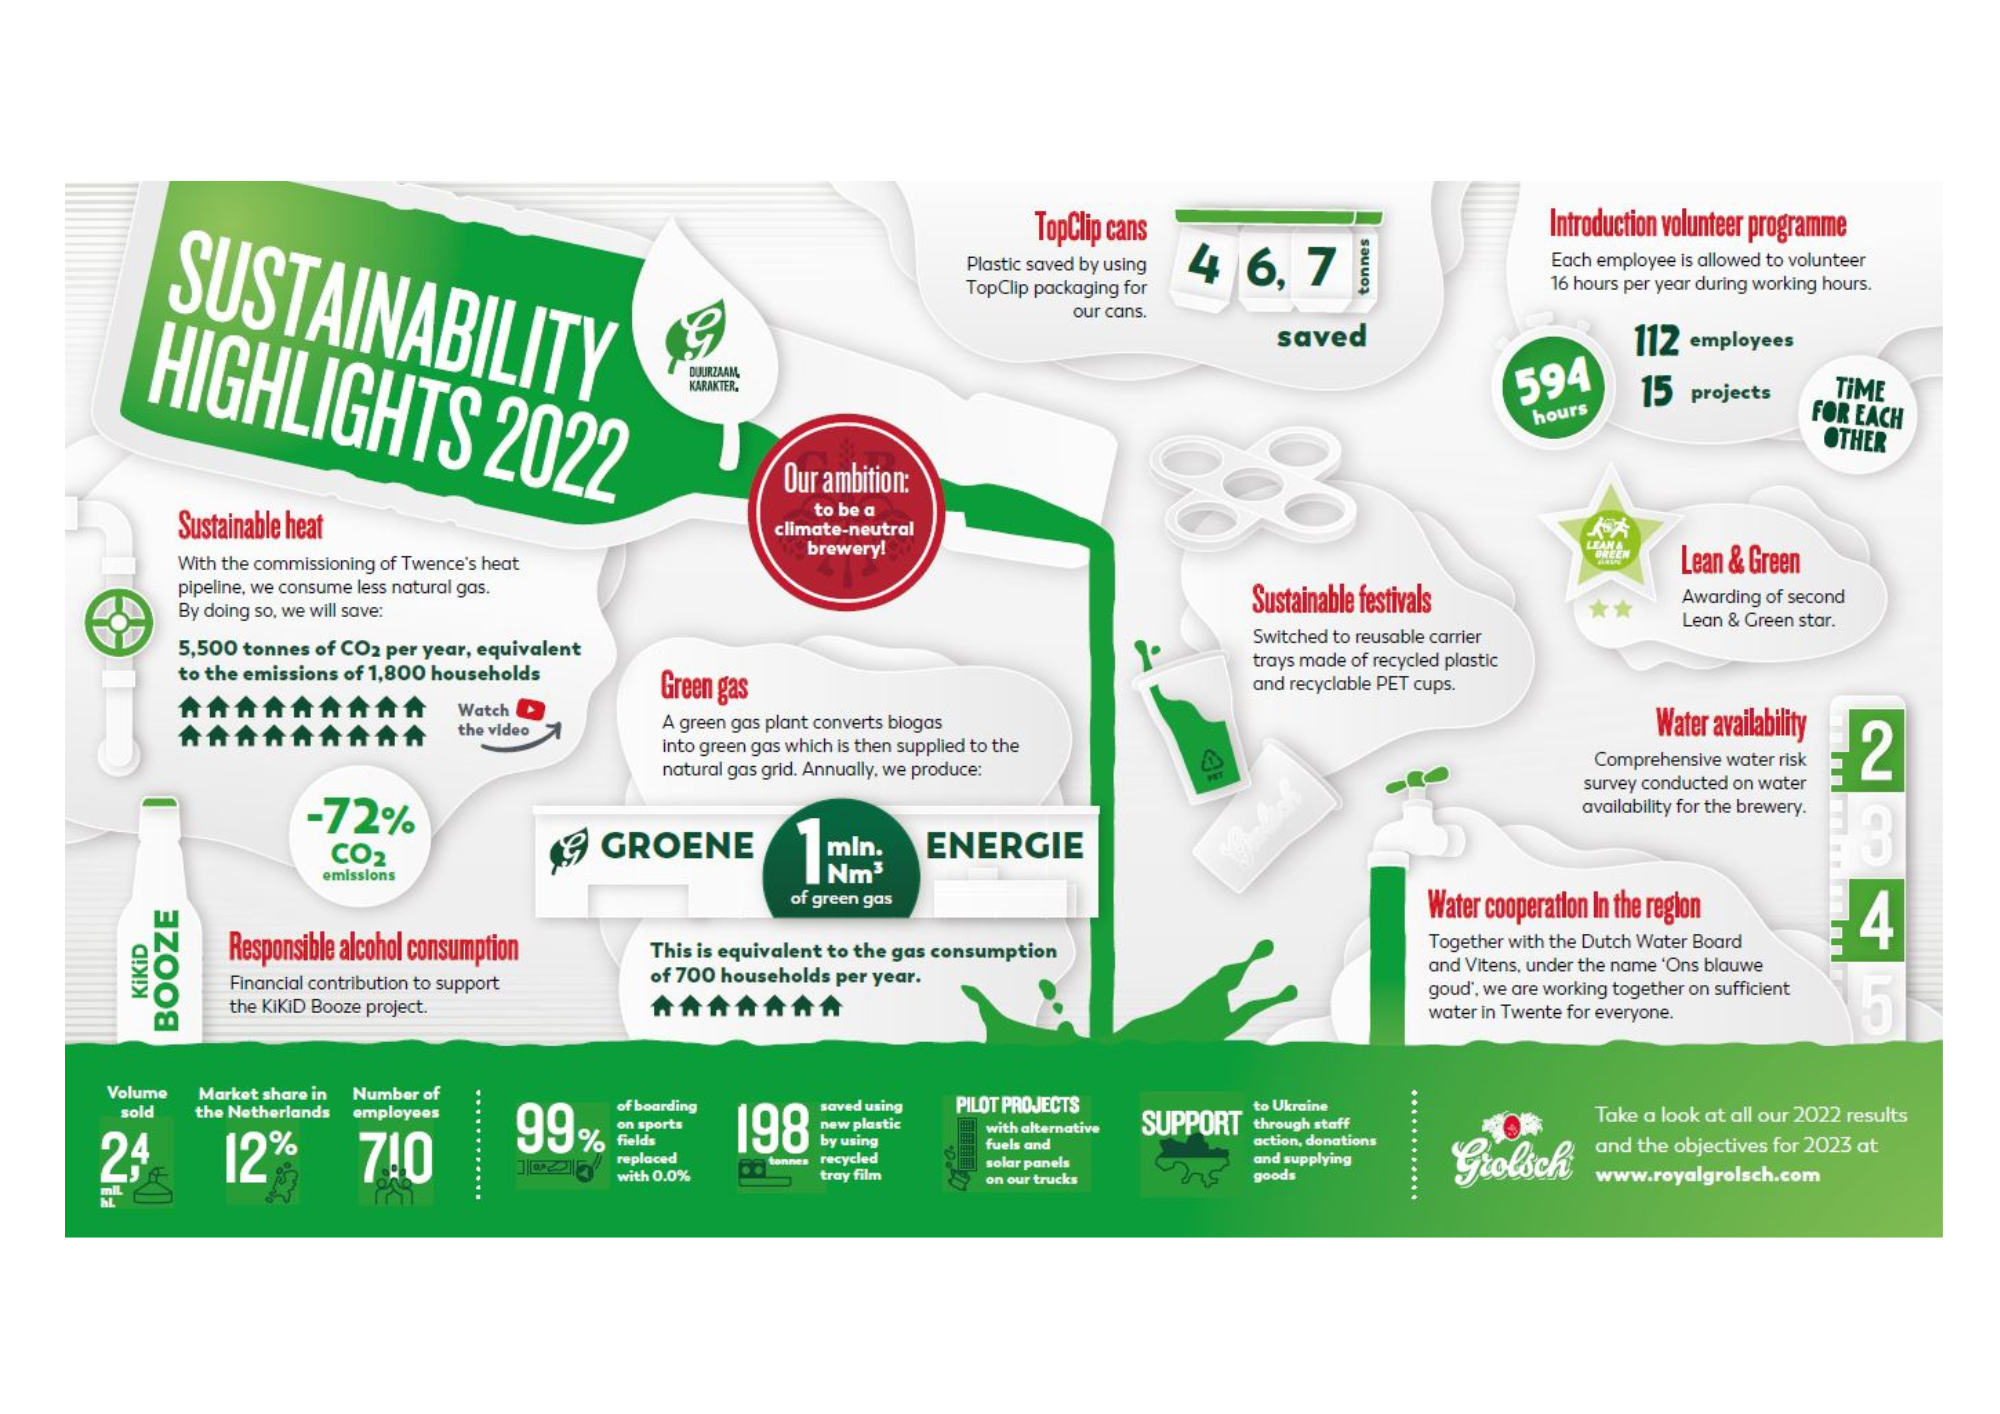 Brewer Grolsch another step closer to achieving sustainability ambitions